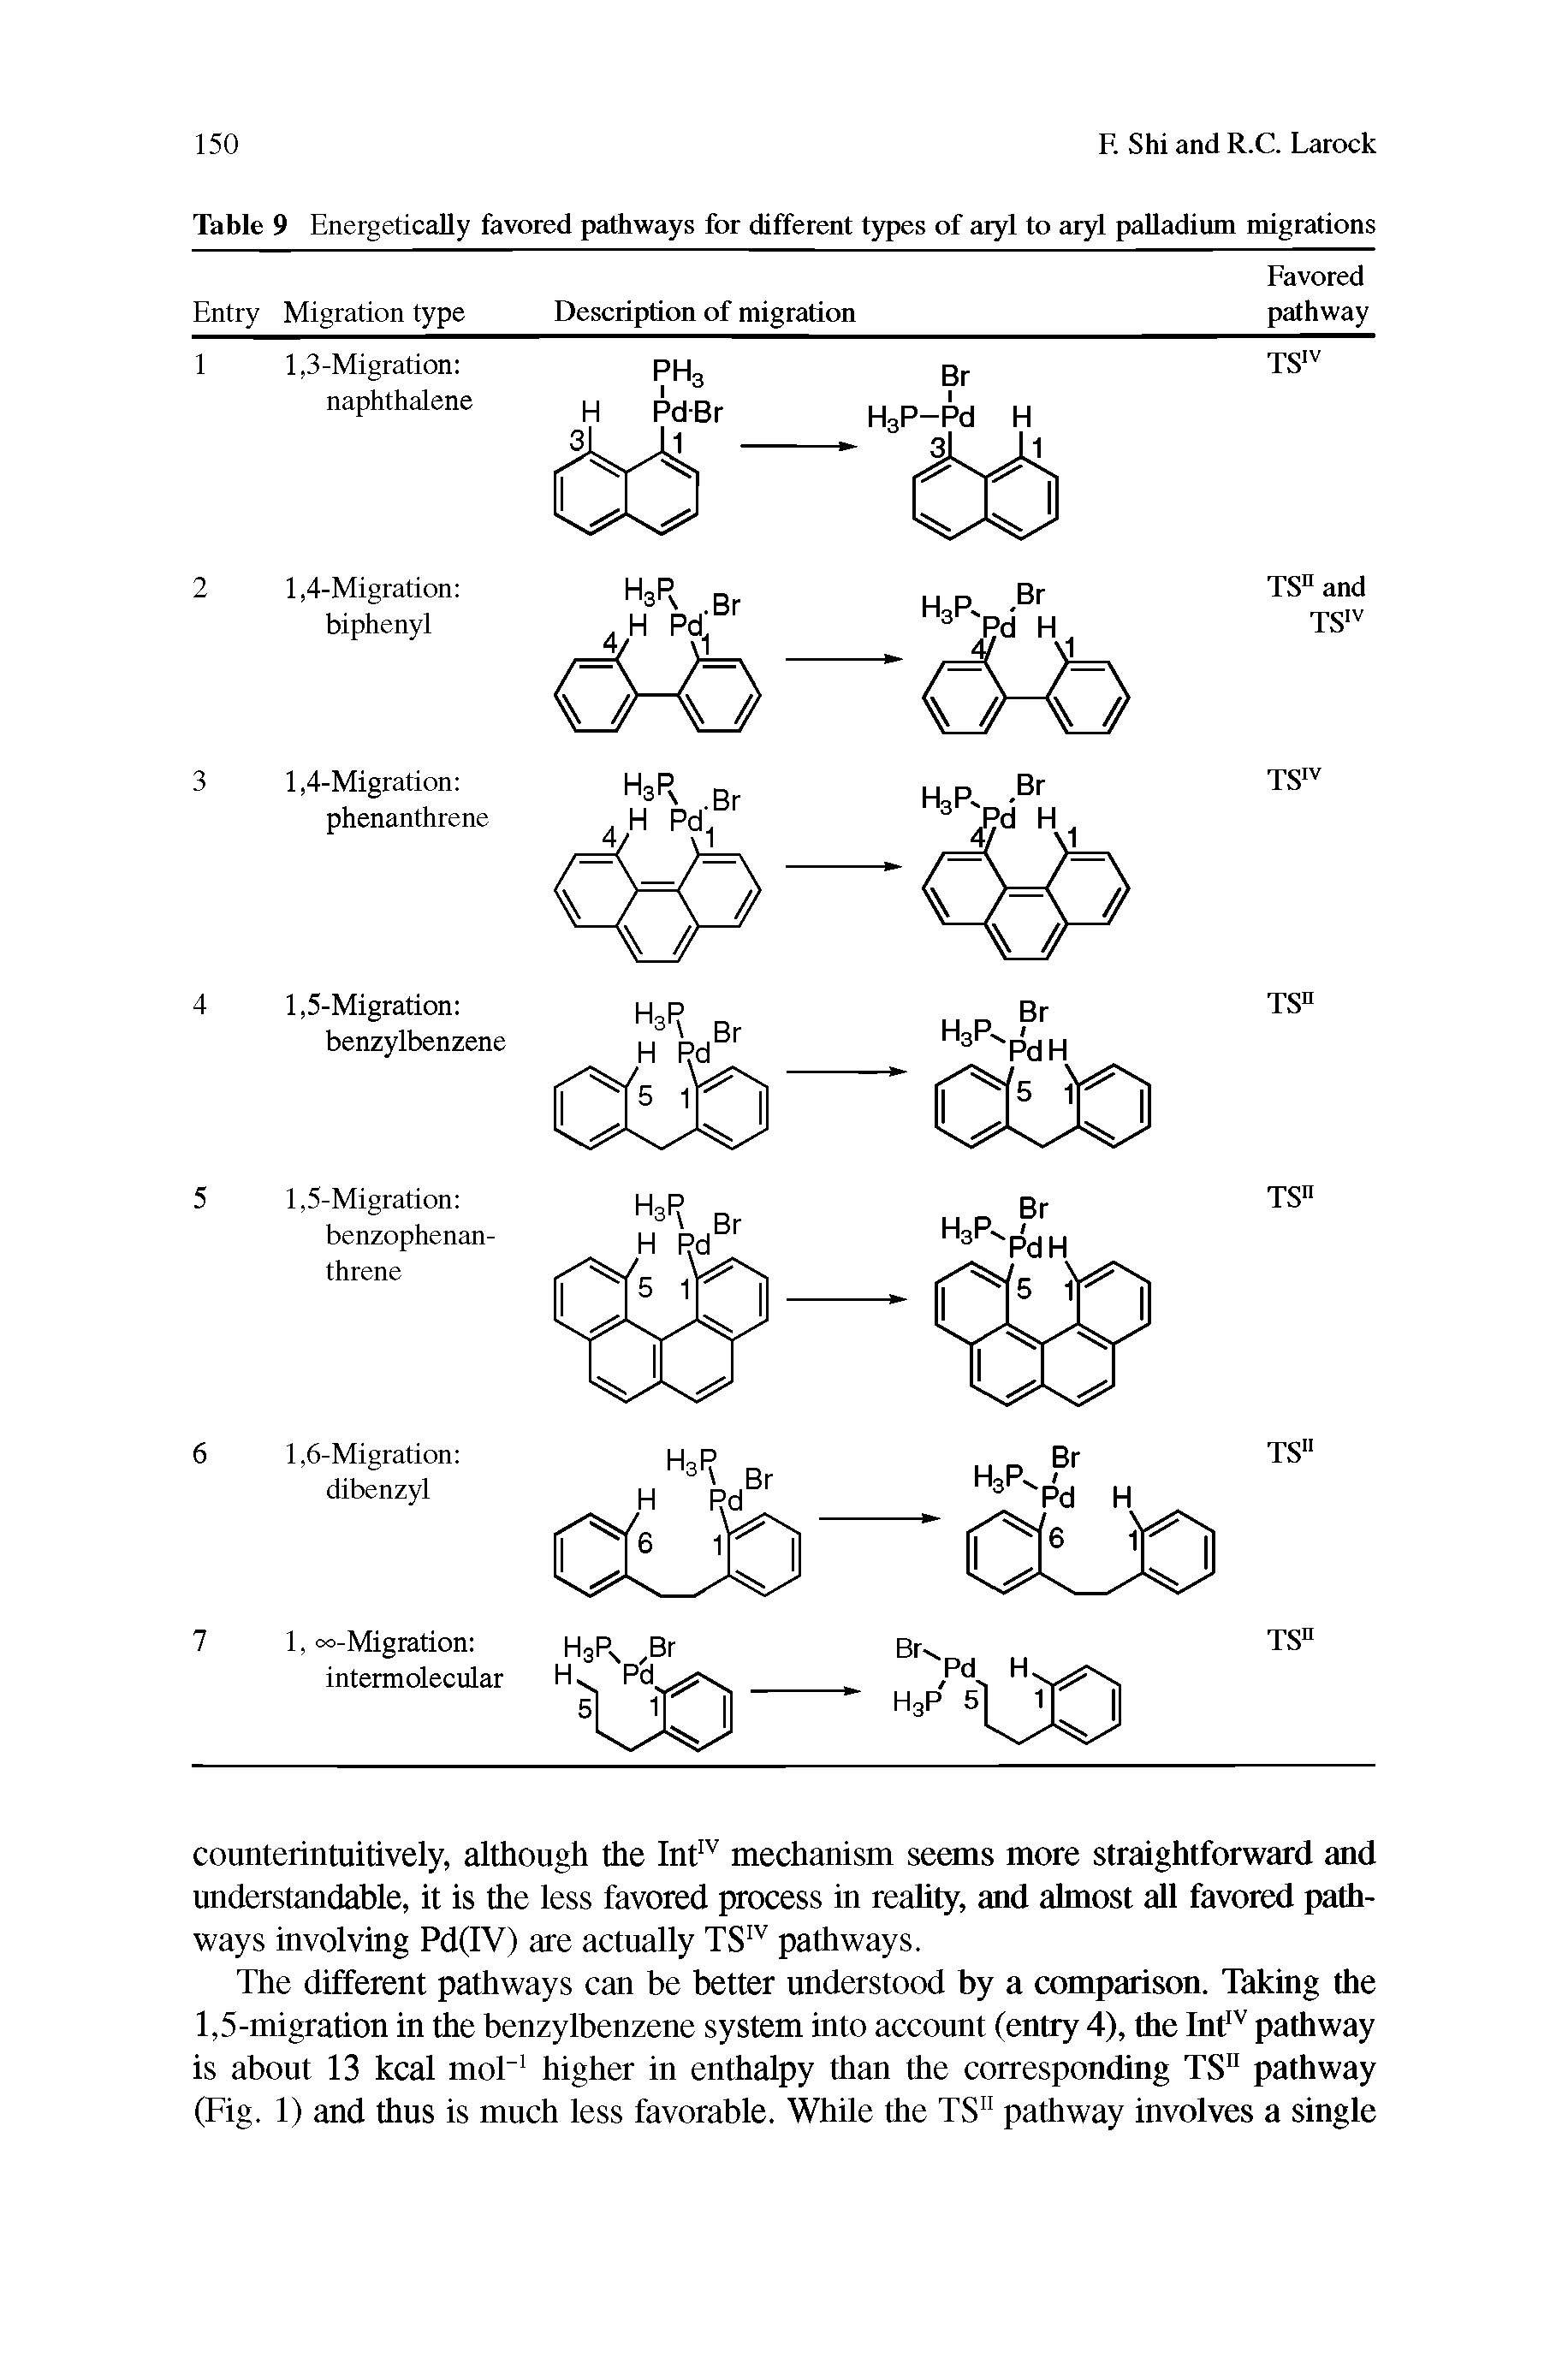 Table 9 Energetically favored pathways for different types of aryl to aryl palladium migrations...